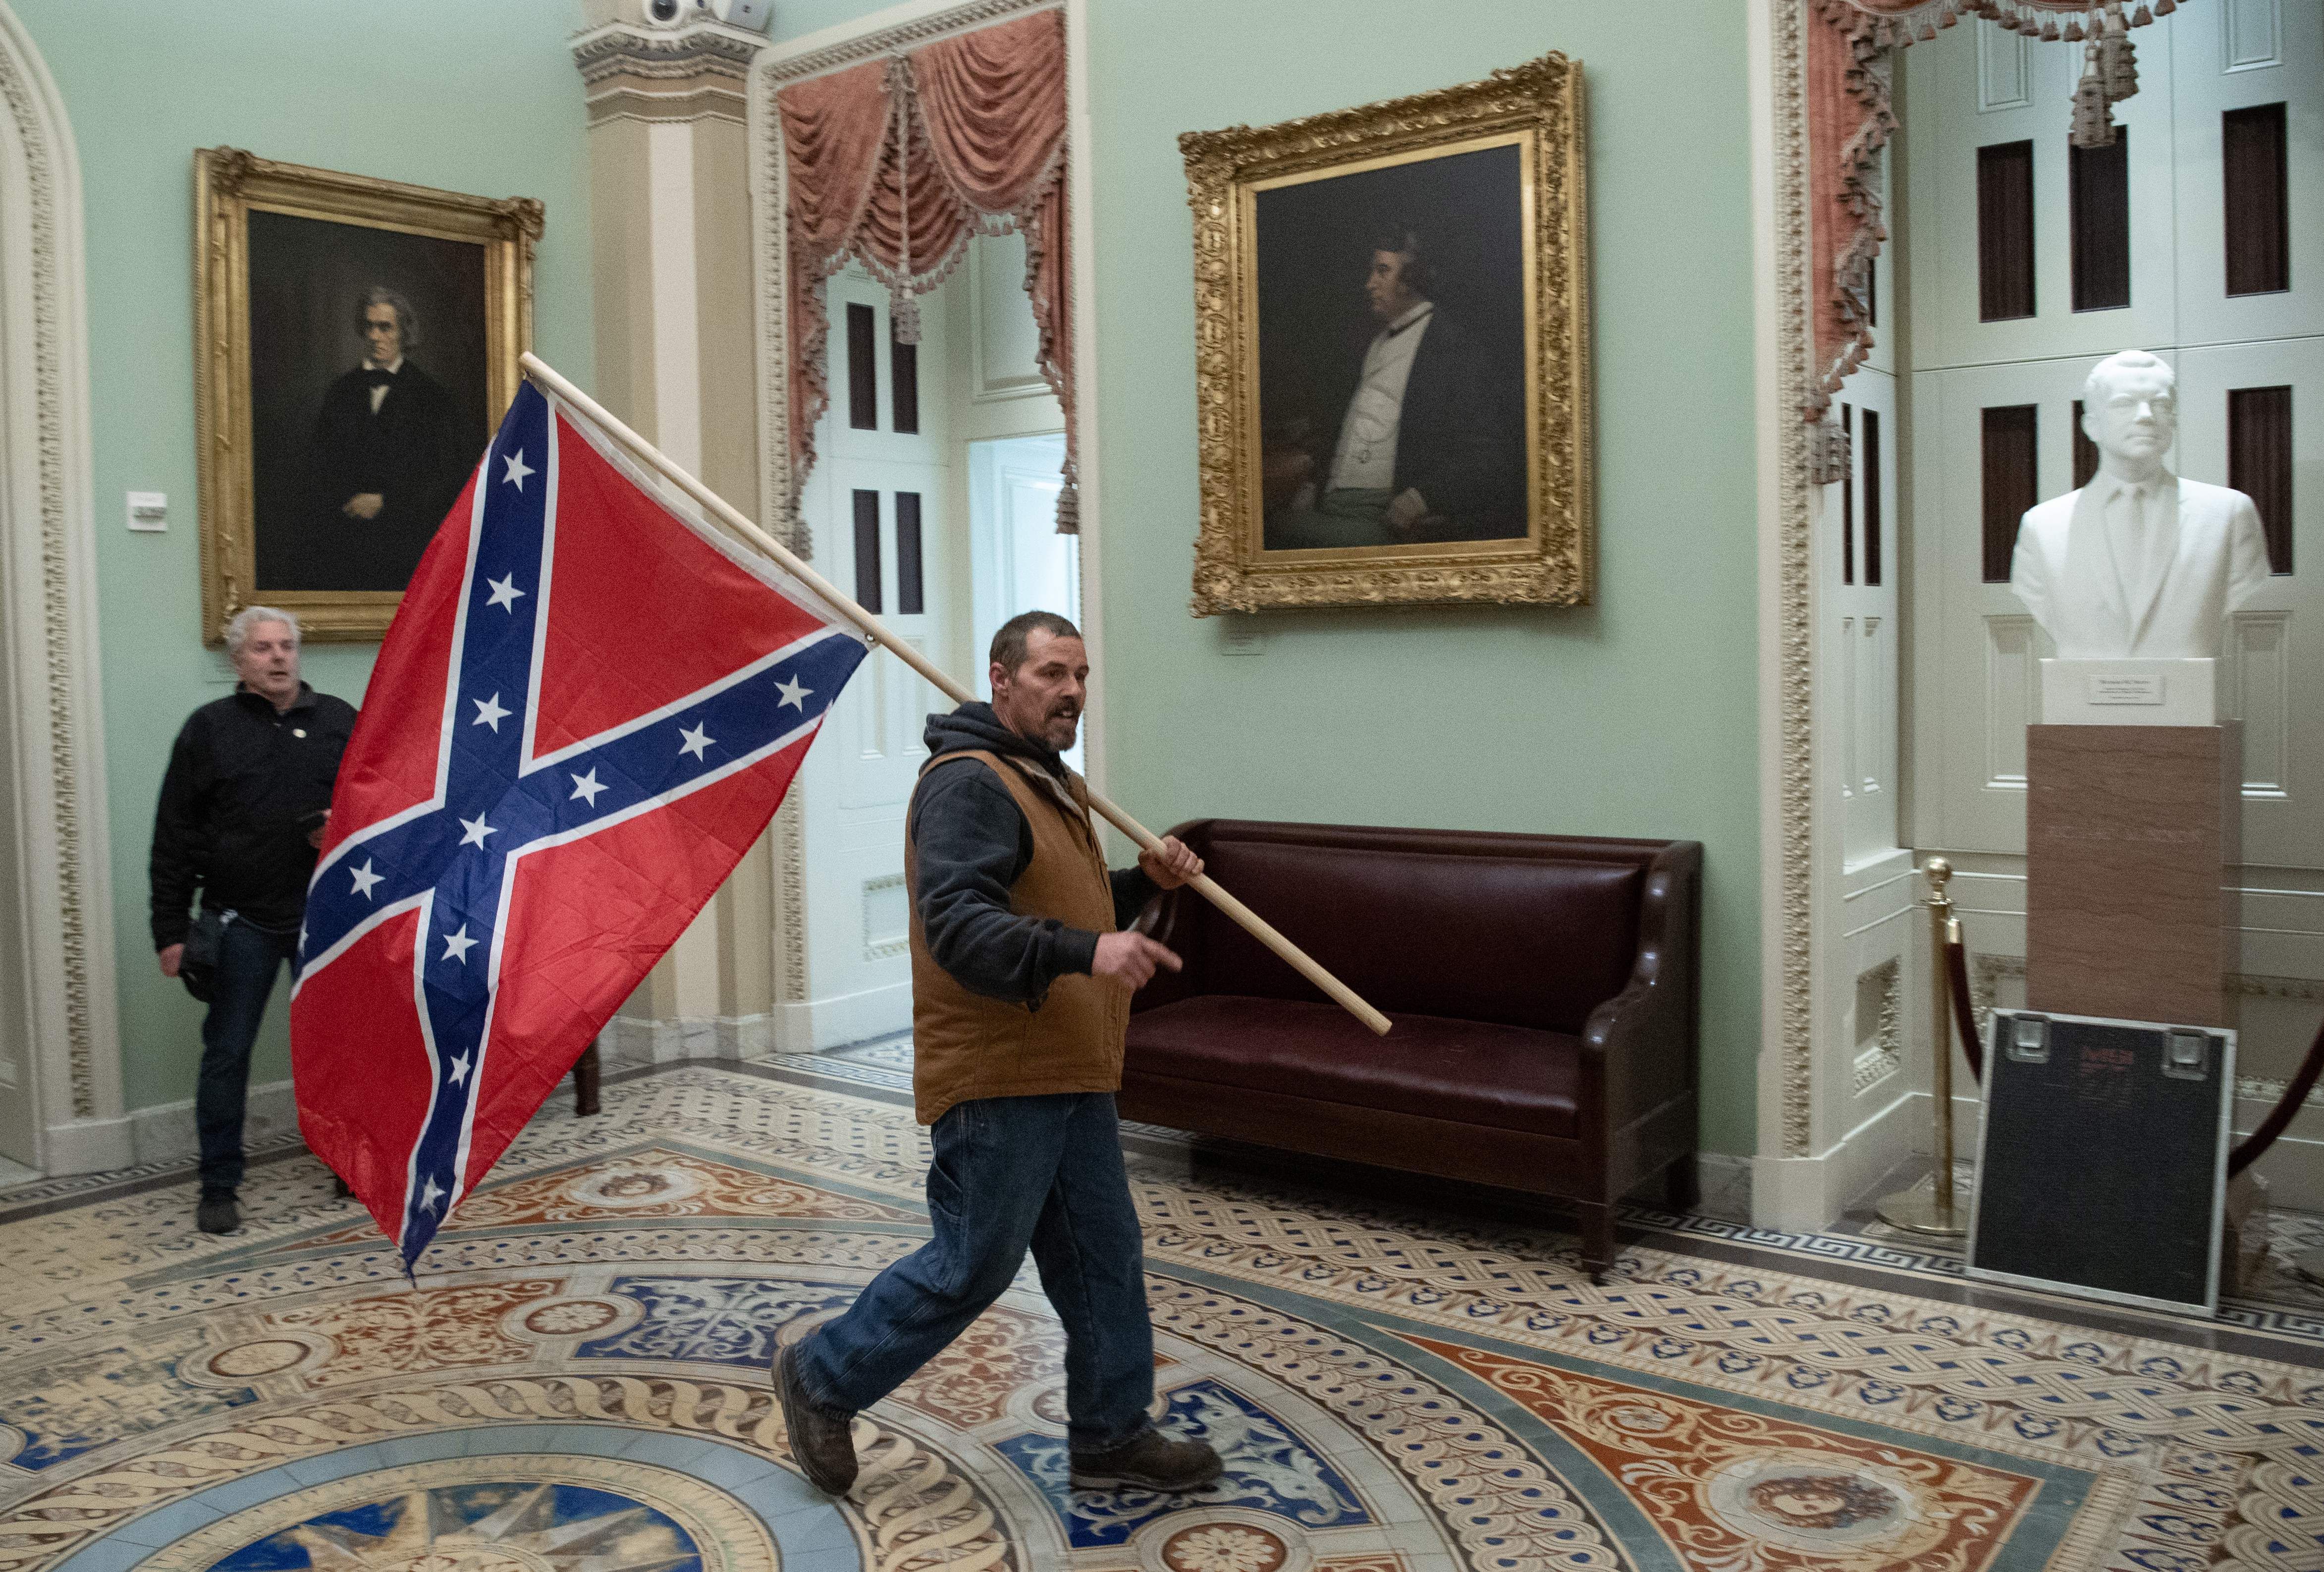 A protestor is seen carrying a Confederate flag through the U.S. Capitol today.